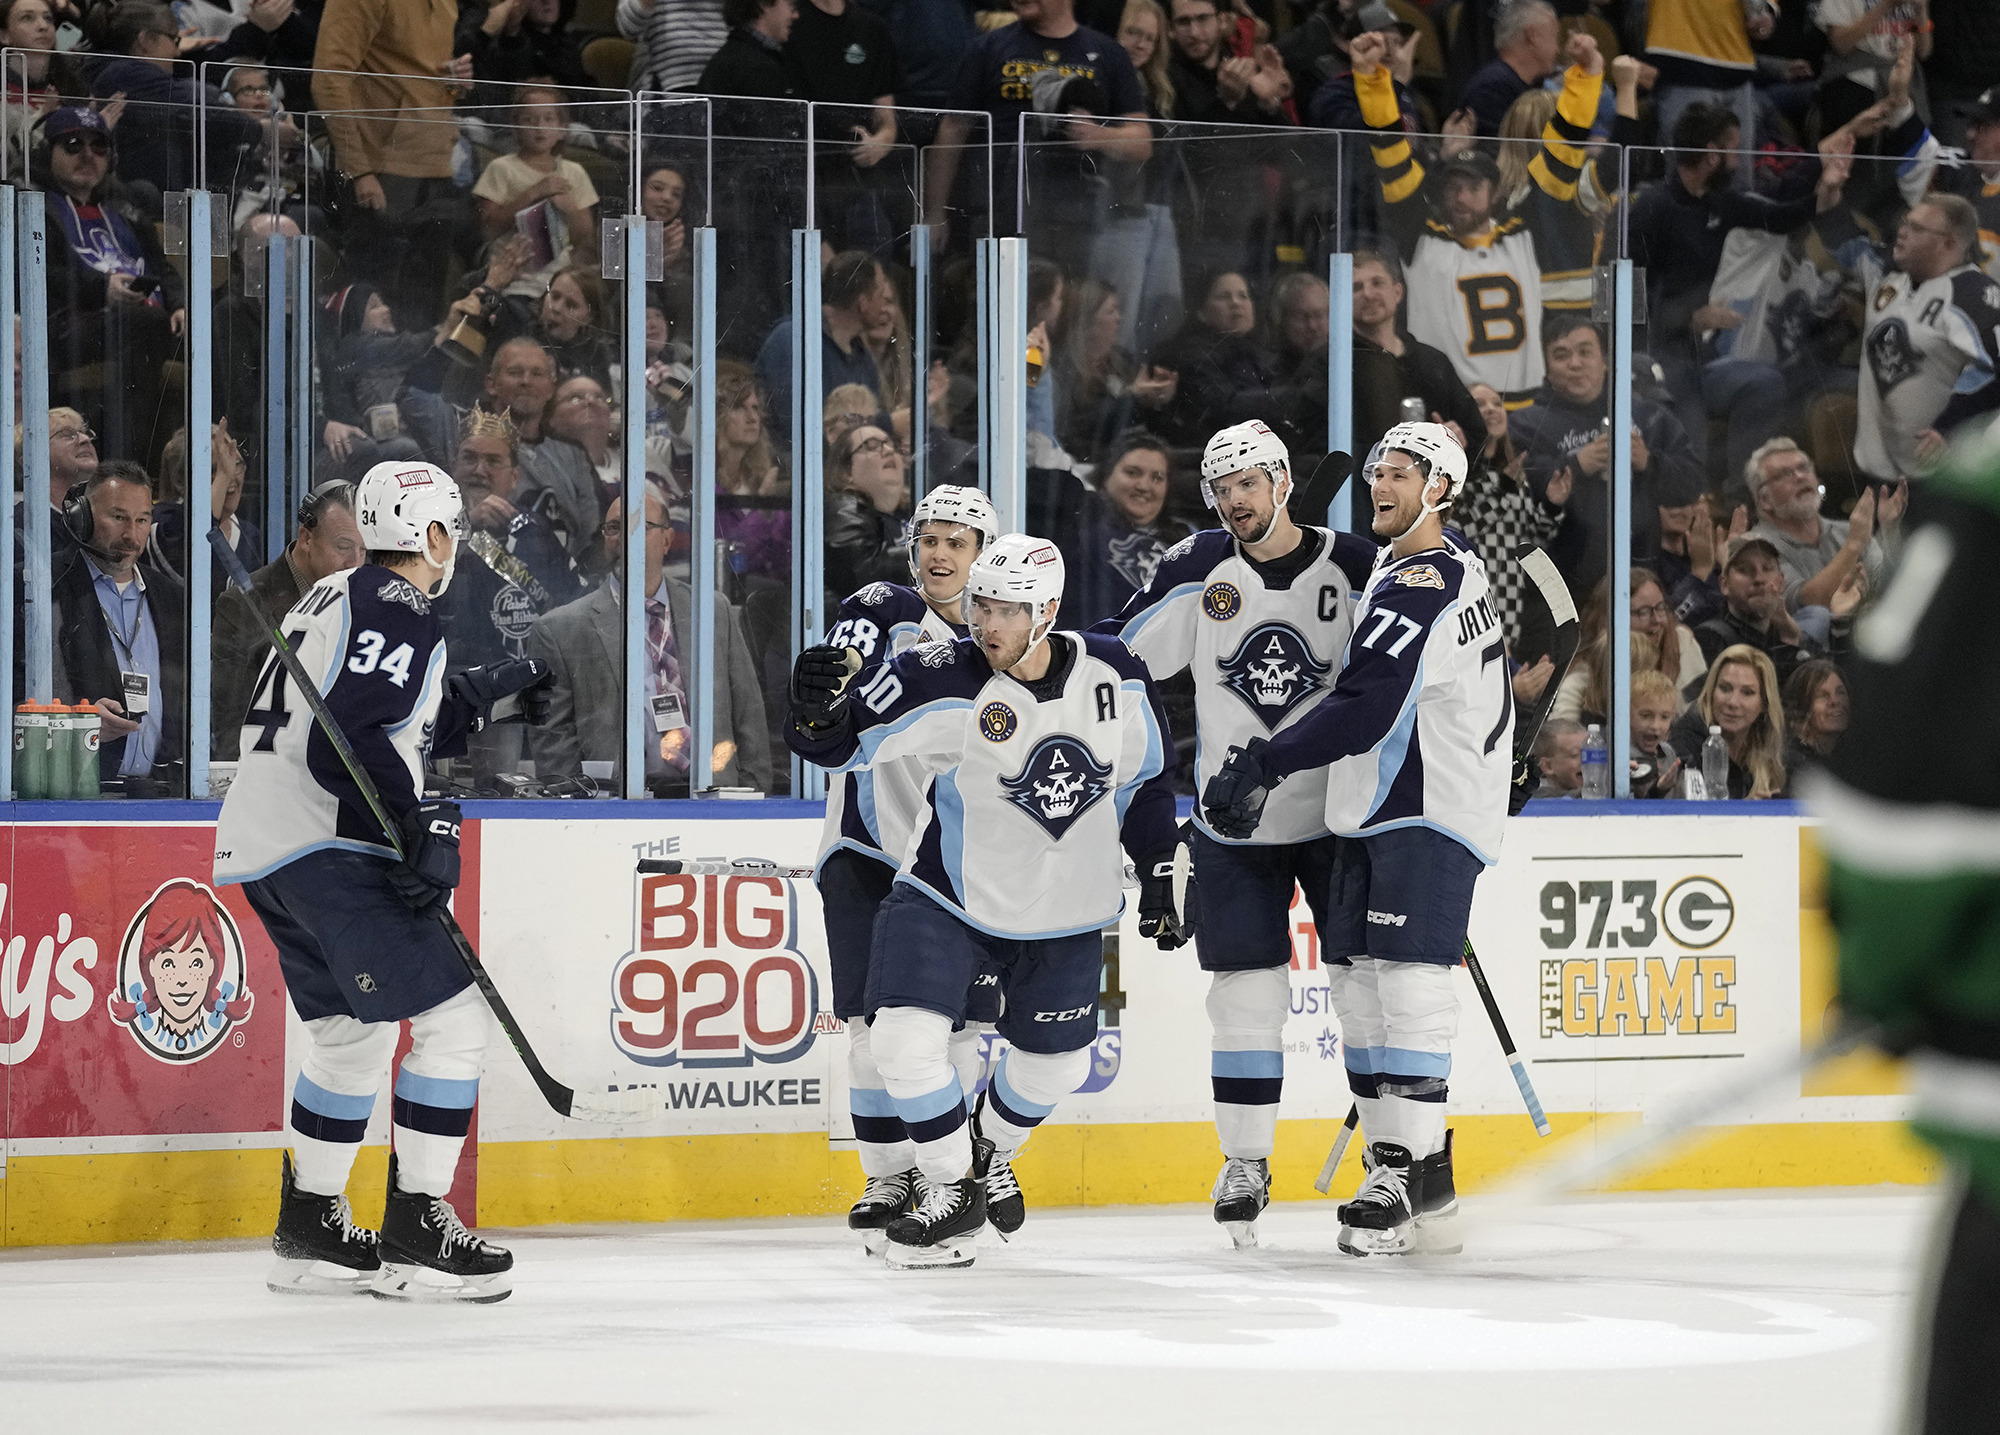 The Milwaukee Admirals celebrate scoring a goal against the Texas Stars.